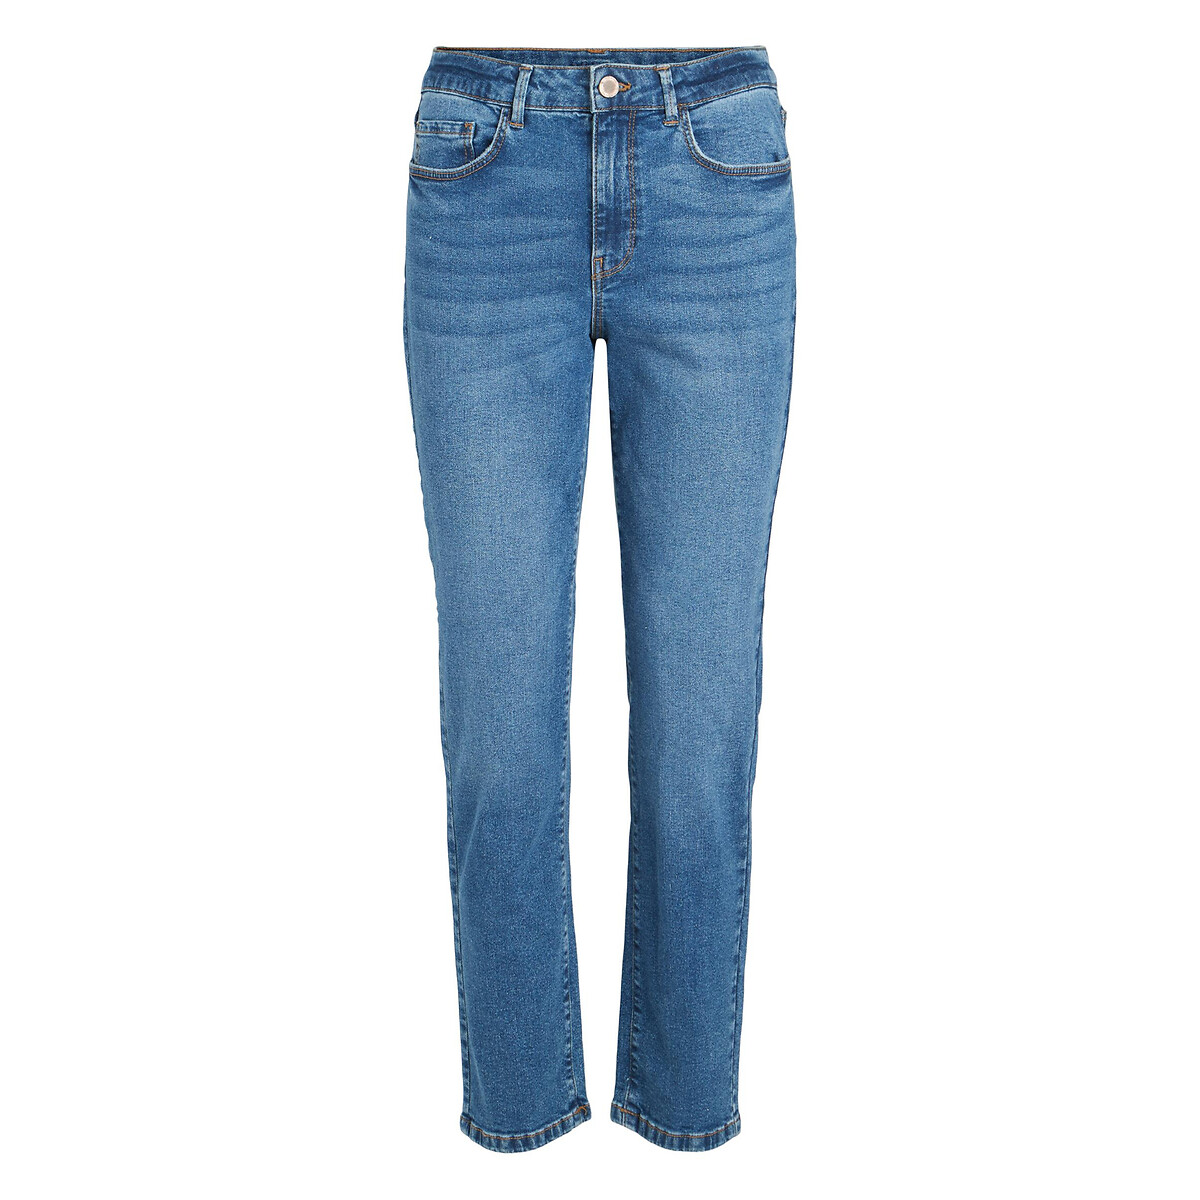 Image of Classic Straight Jeans, Mid Rise